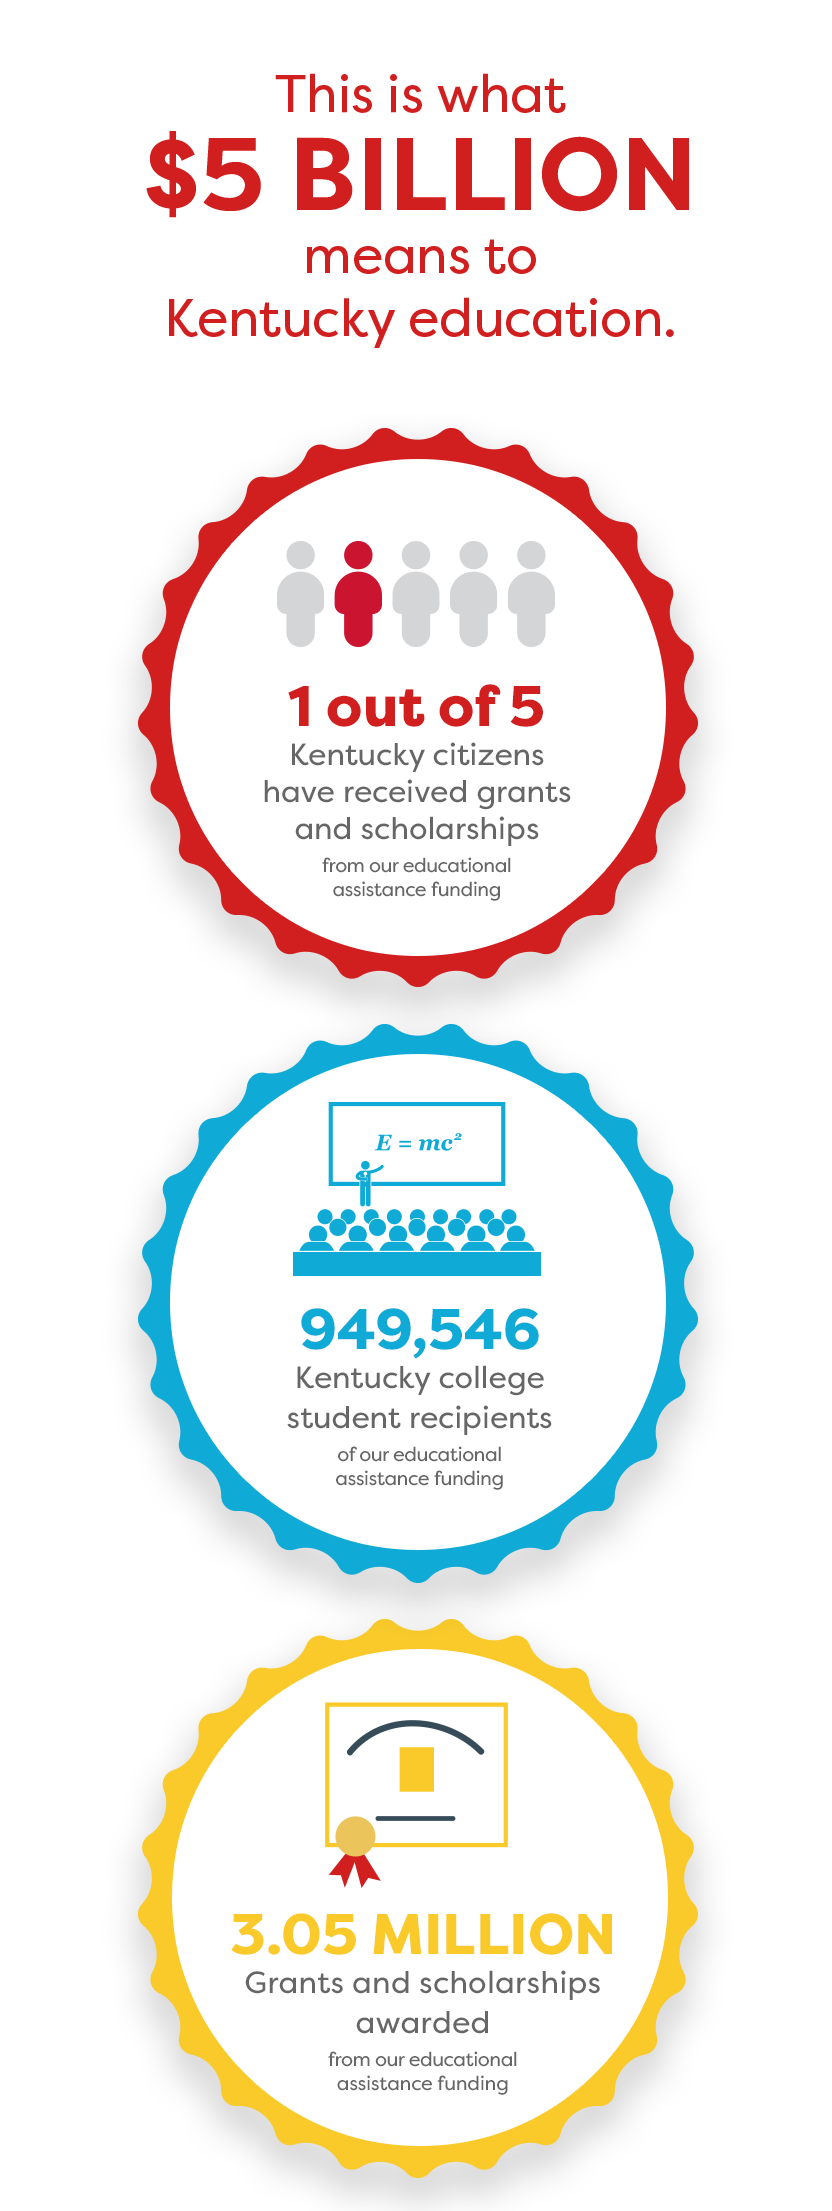 This is what $5 Billion means 1 out of 5 KY citizens received grants and scholarships, 949,546 KY college recipients, 3.05 Million grants and scholarships awarded